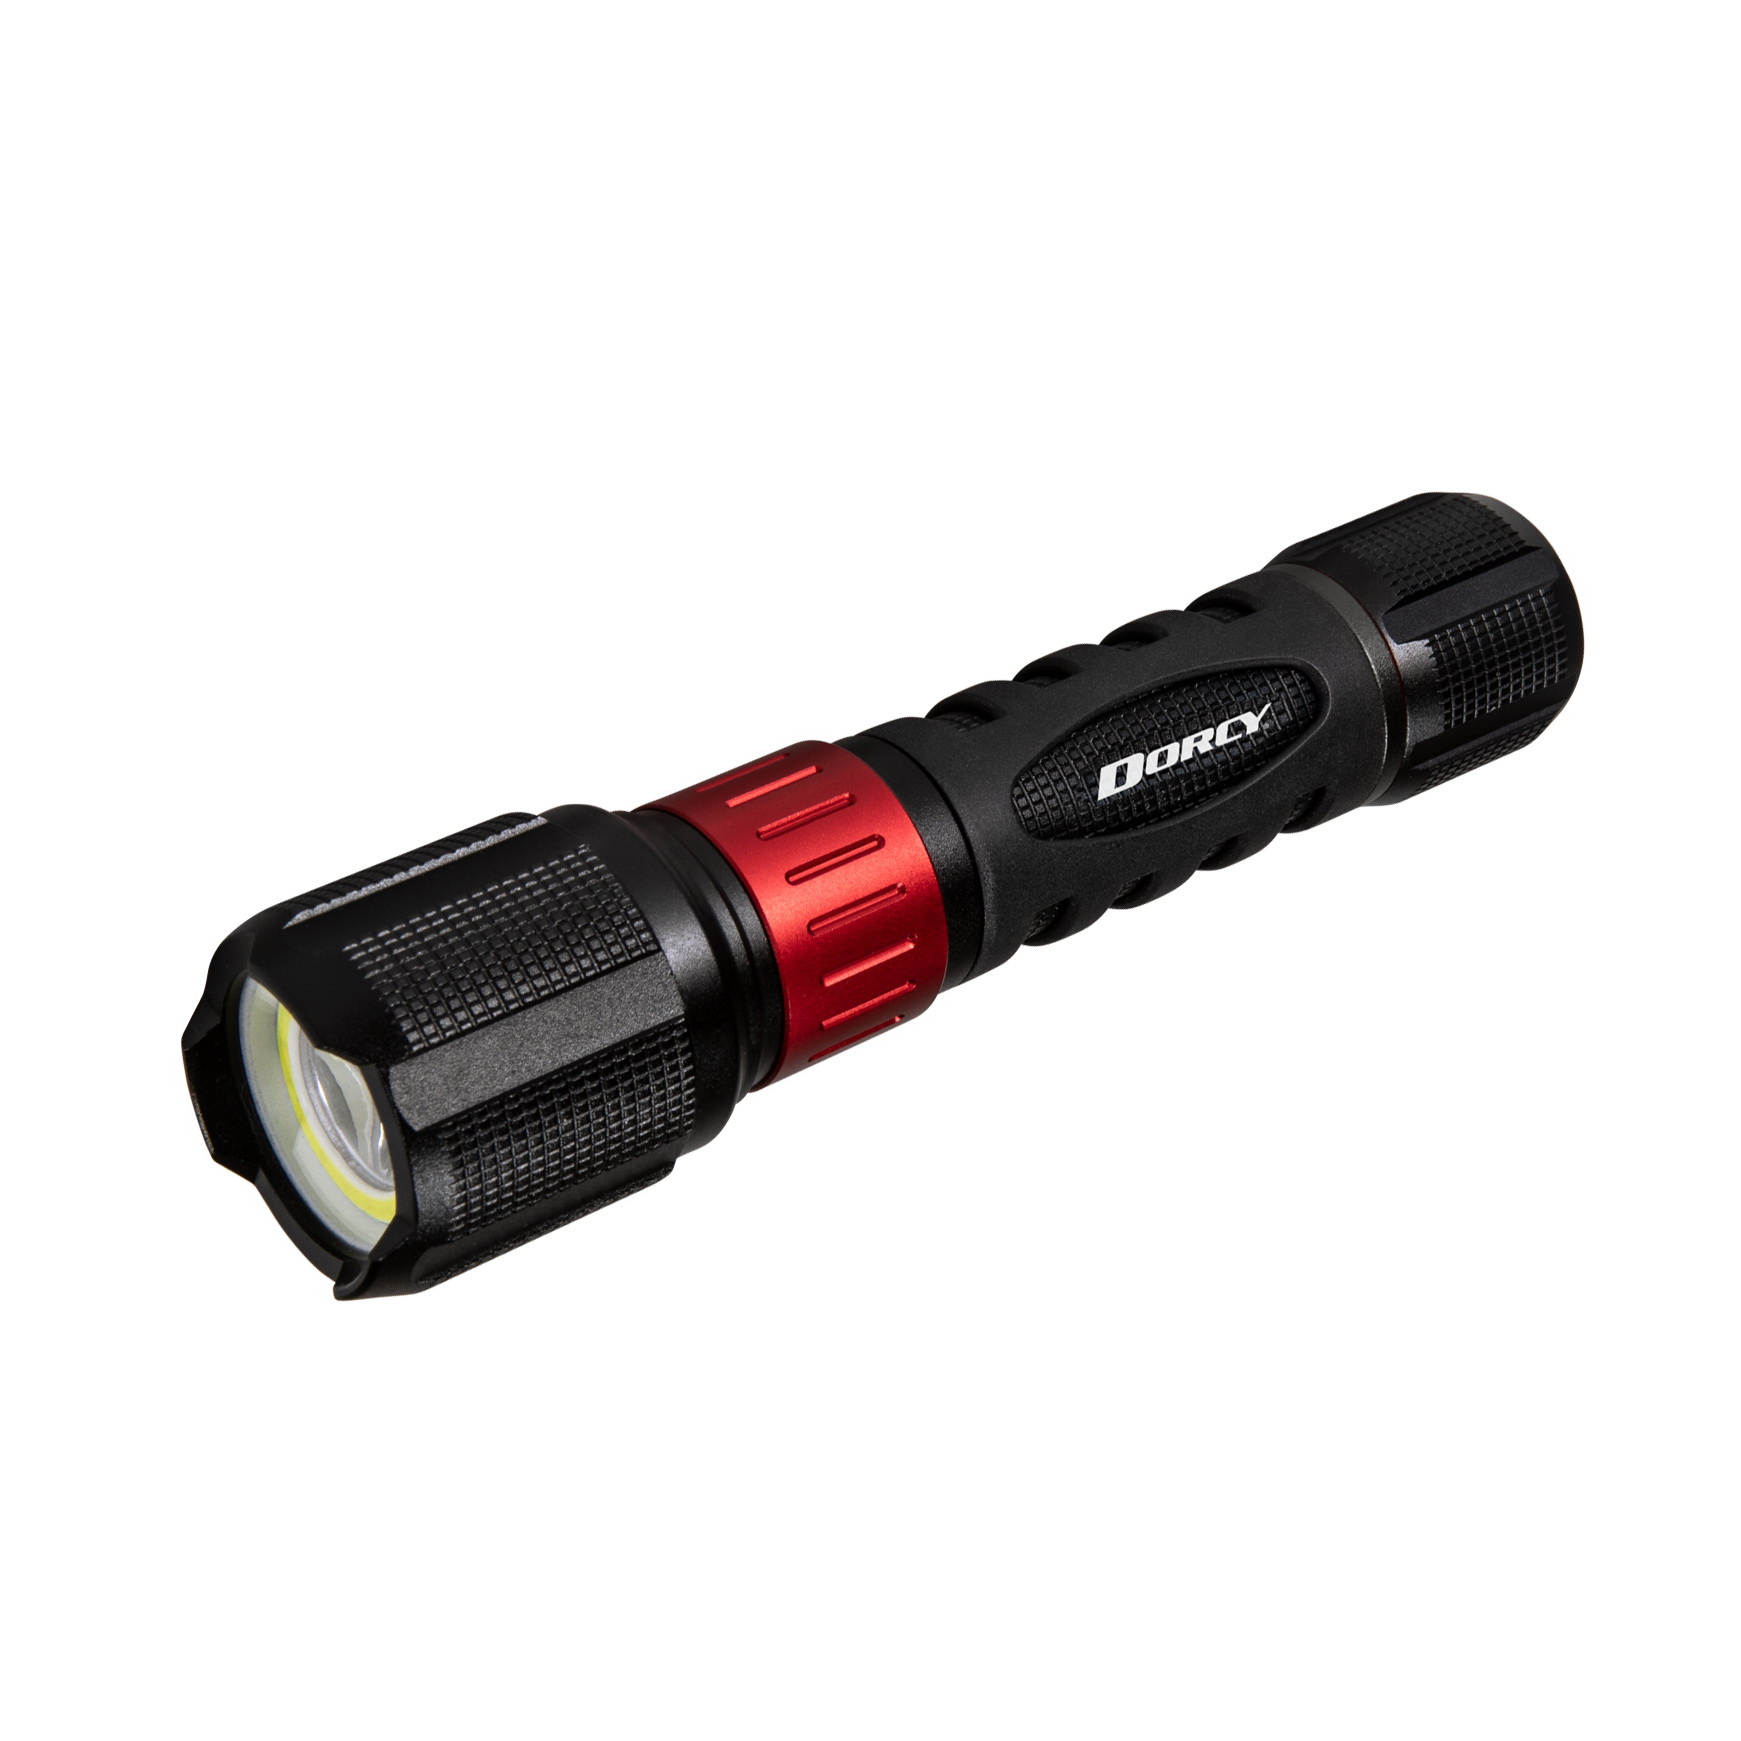 Ultra Series 41-4358 Rechargeable Flashlight with Powerbank, 2000 mAh, Lithium-Ion Battery, LED Lamp, Black